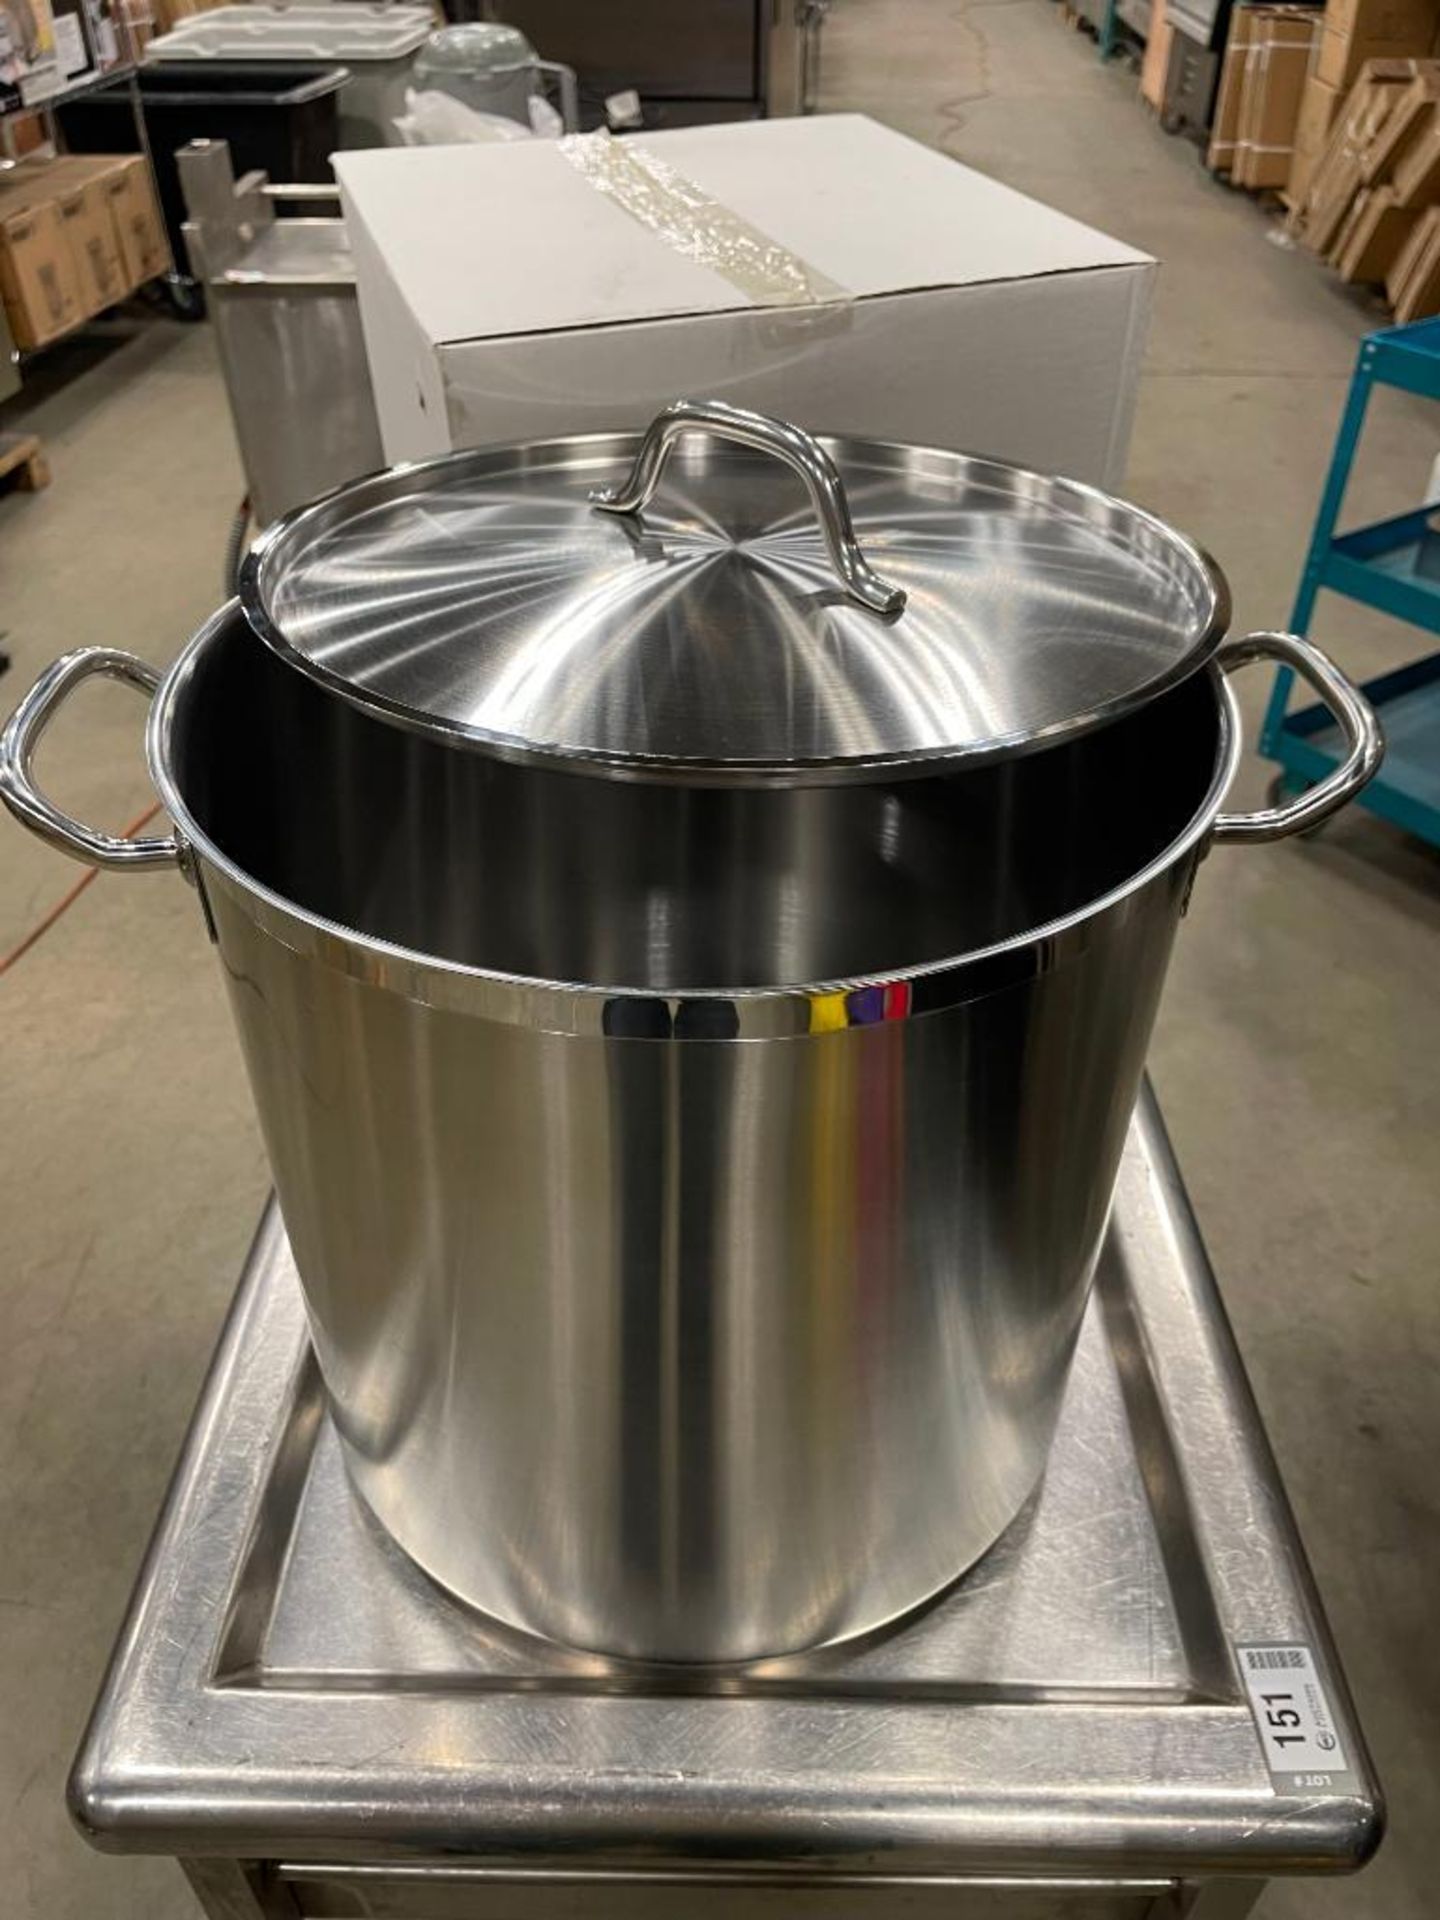 32QT HEAVY DUTY STAINLESS STOCK POT INDUCTION CAPABLE, JR 47322 - NEW - Image 5 of 5